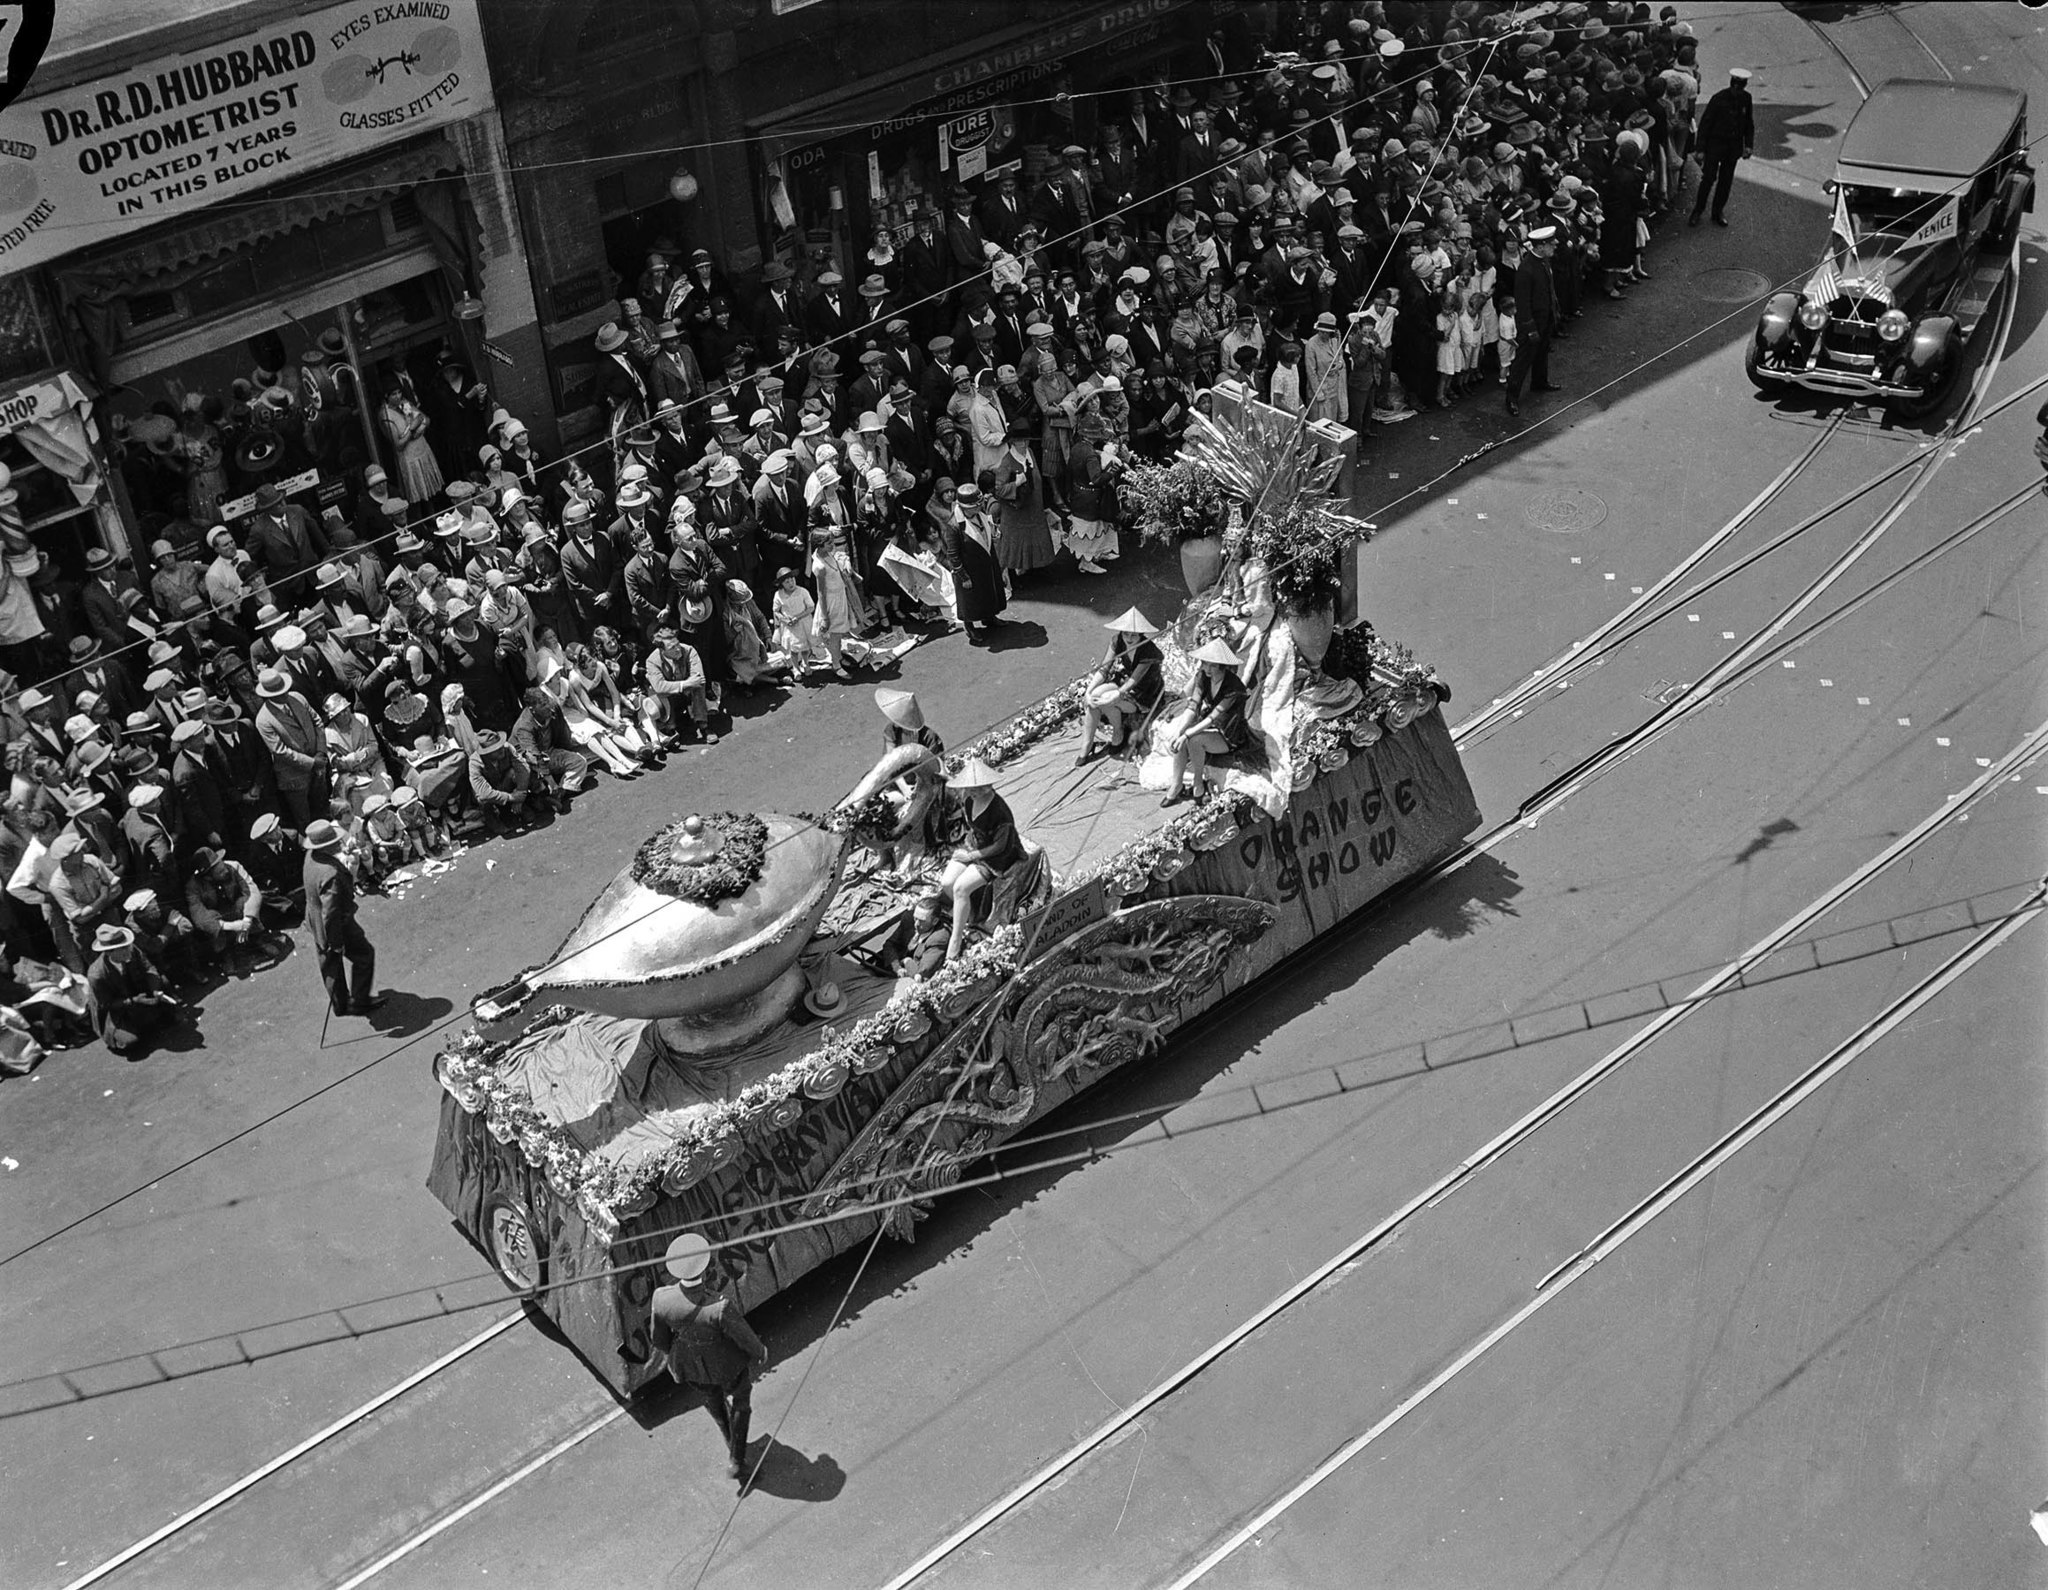 April 26, 1928: Anaheim is represented by an Aladdin lamp float in the Los Angeles City Hall Dedicat